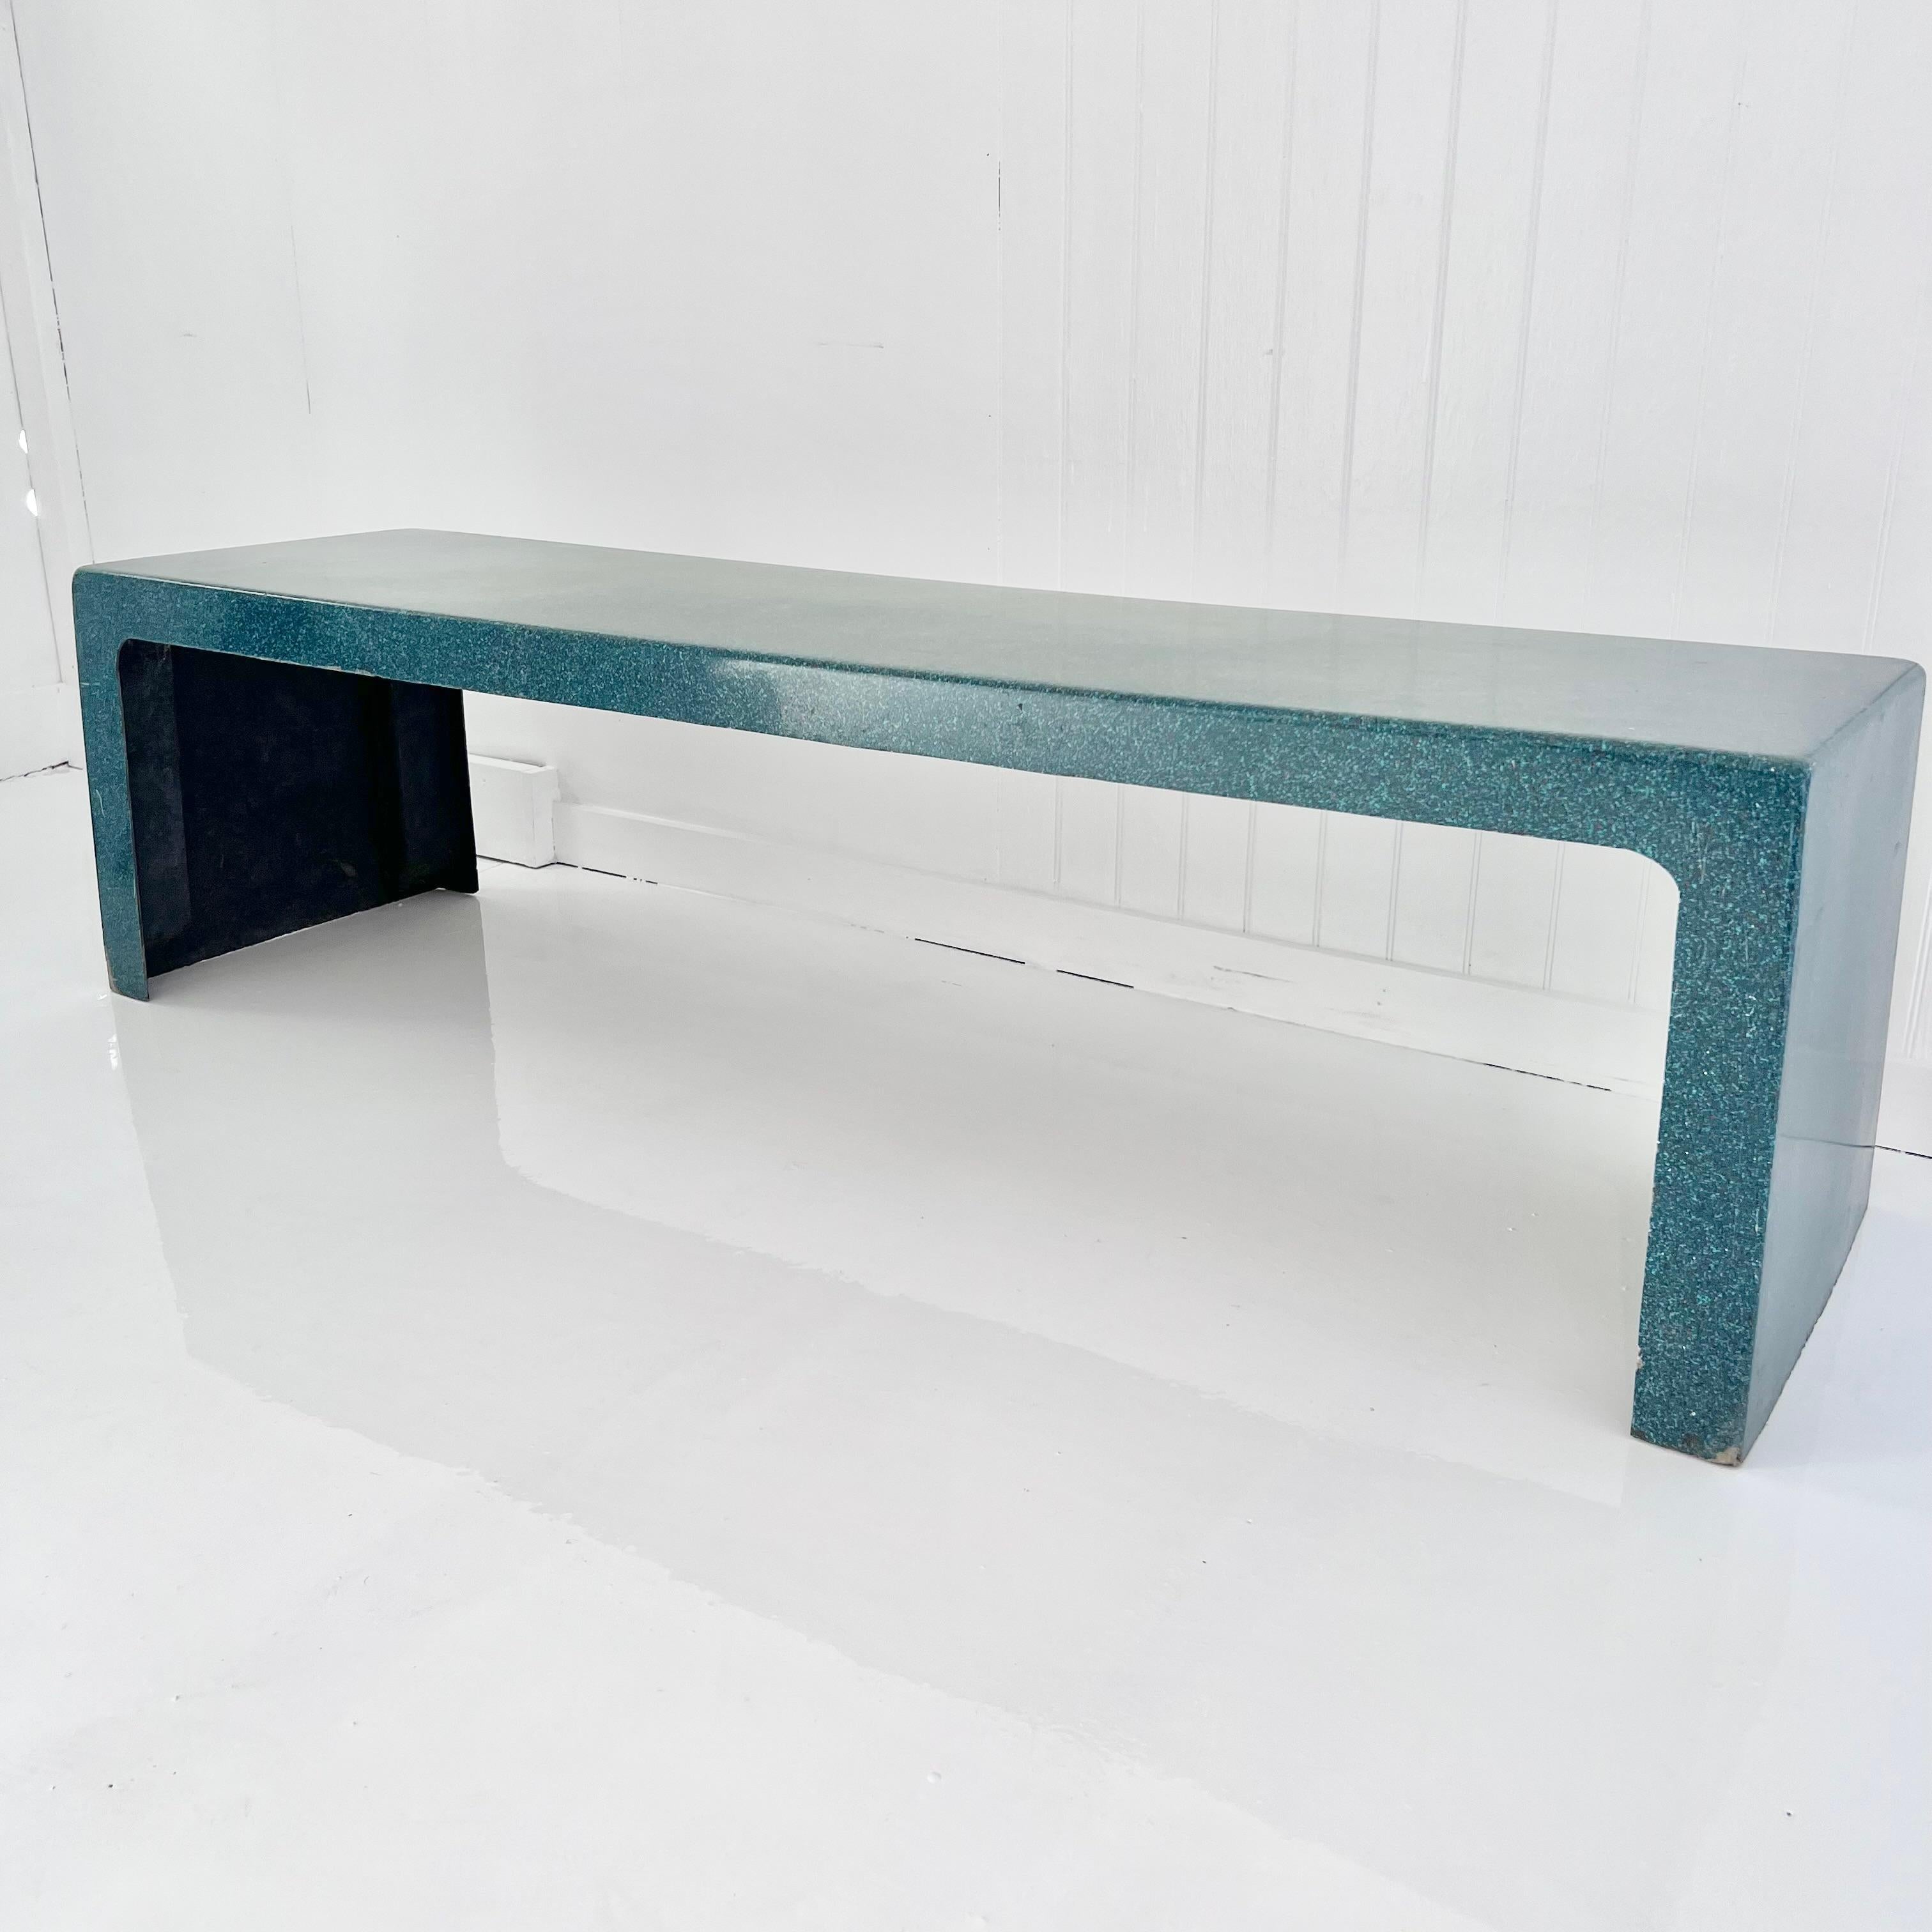 Sculptural Green Fiberglass Bench, 1980s USA In Good Condition For Sale In Los Angeles, CA